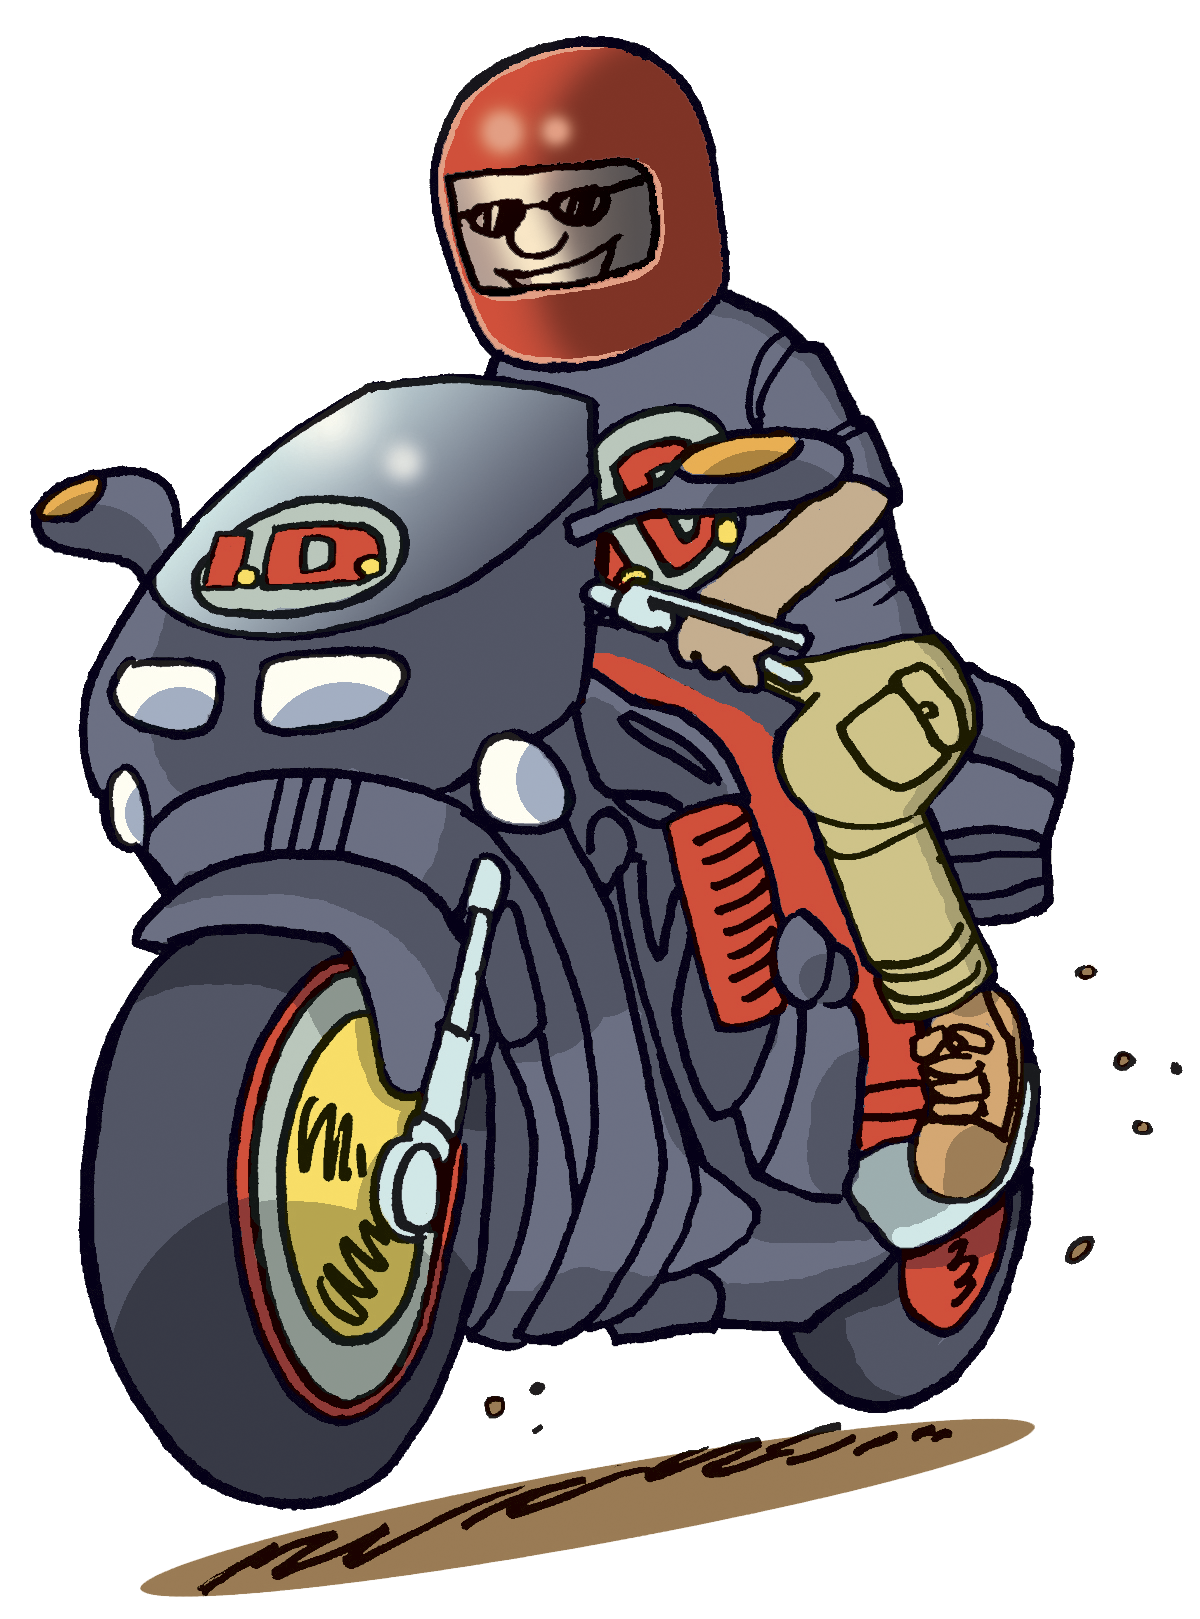 Free motorcycle clipart motorcycle clip art pictures graphics 2 2